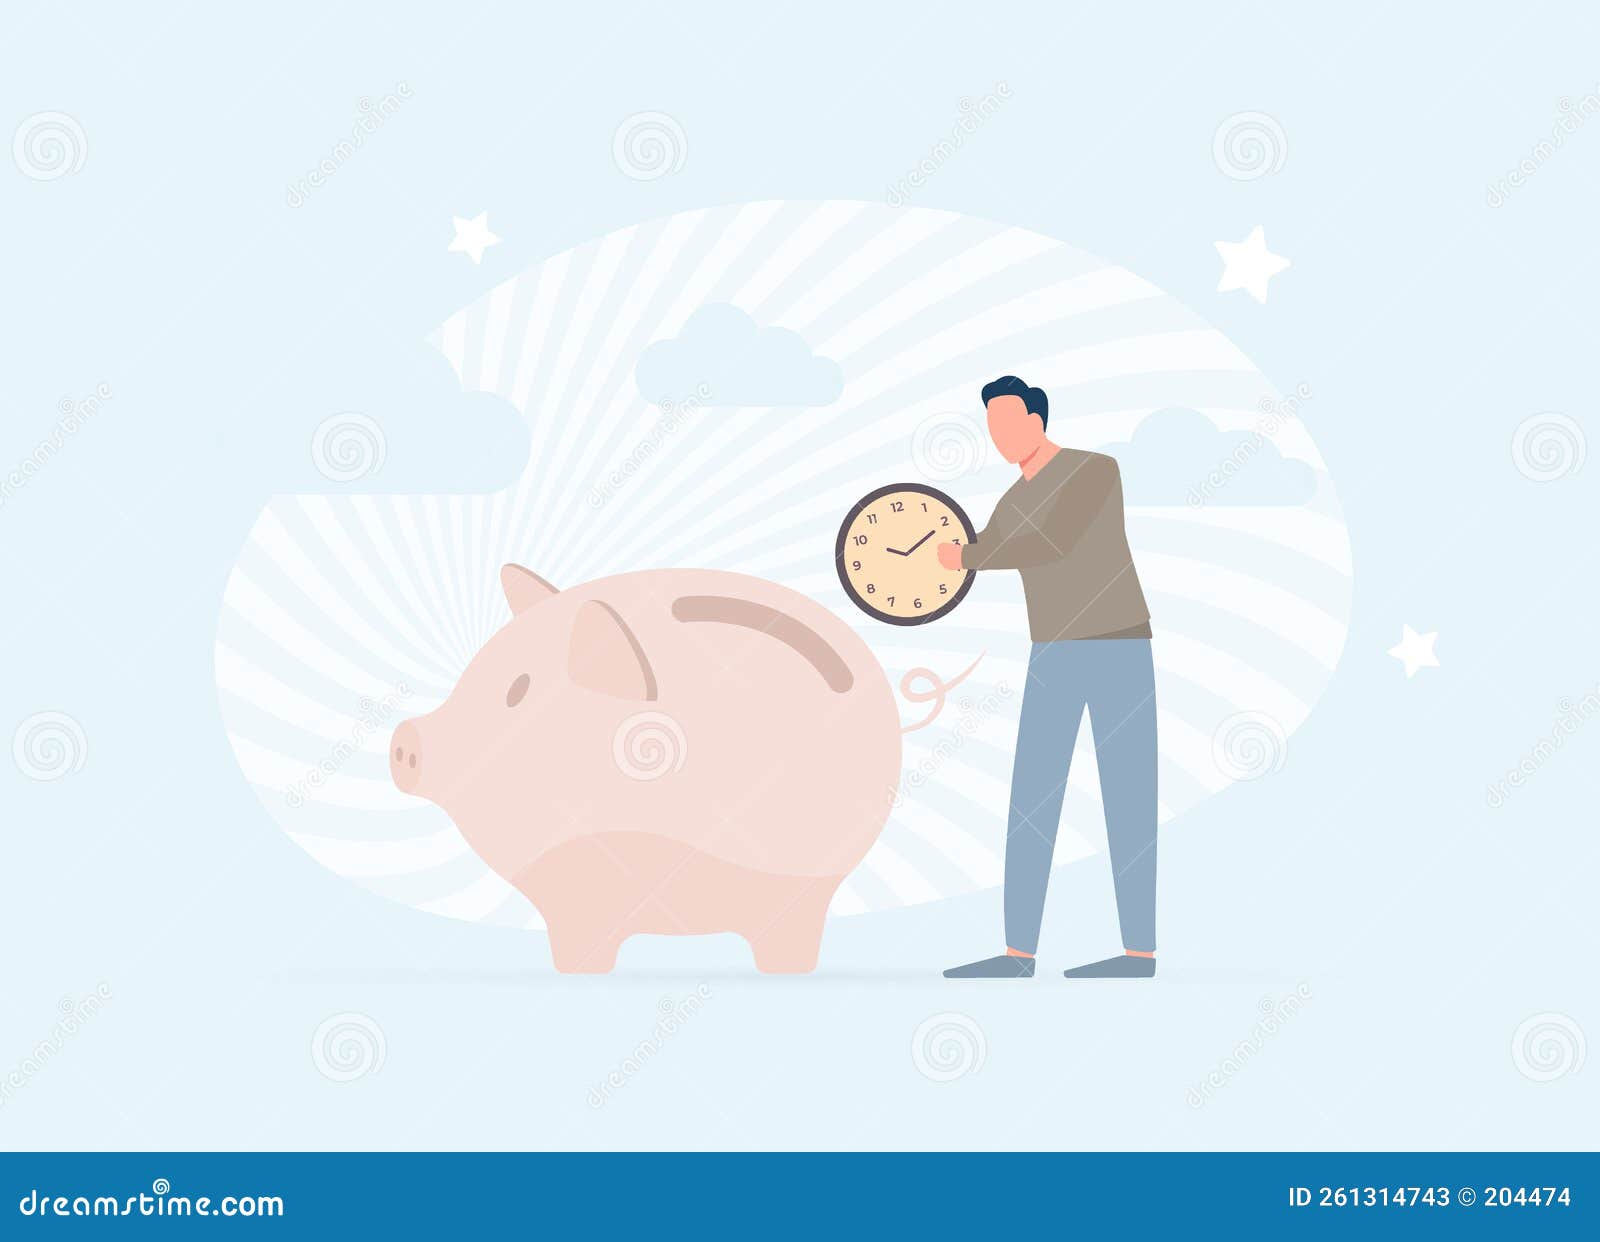 time saving   concept with man putting clock face into piggy bank. timesaving services with work